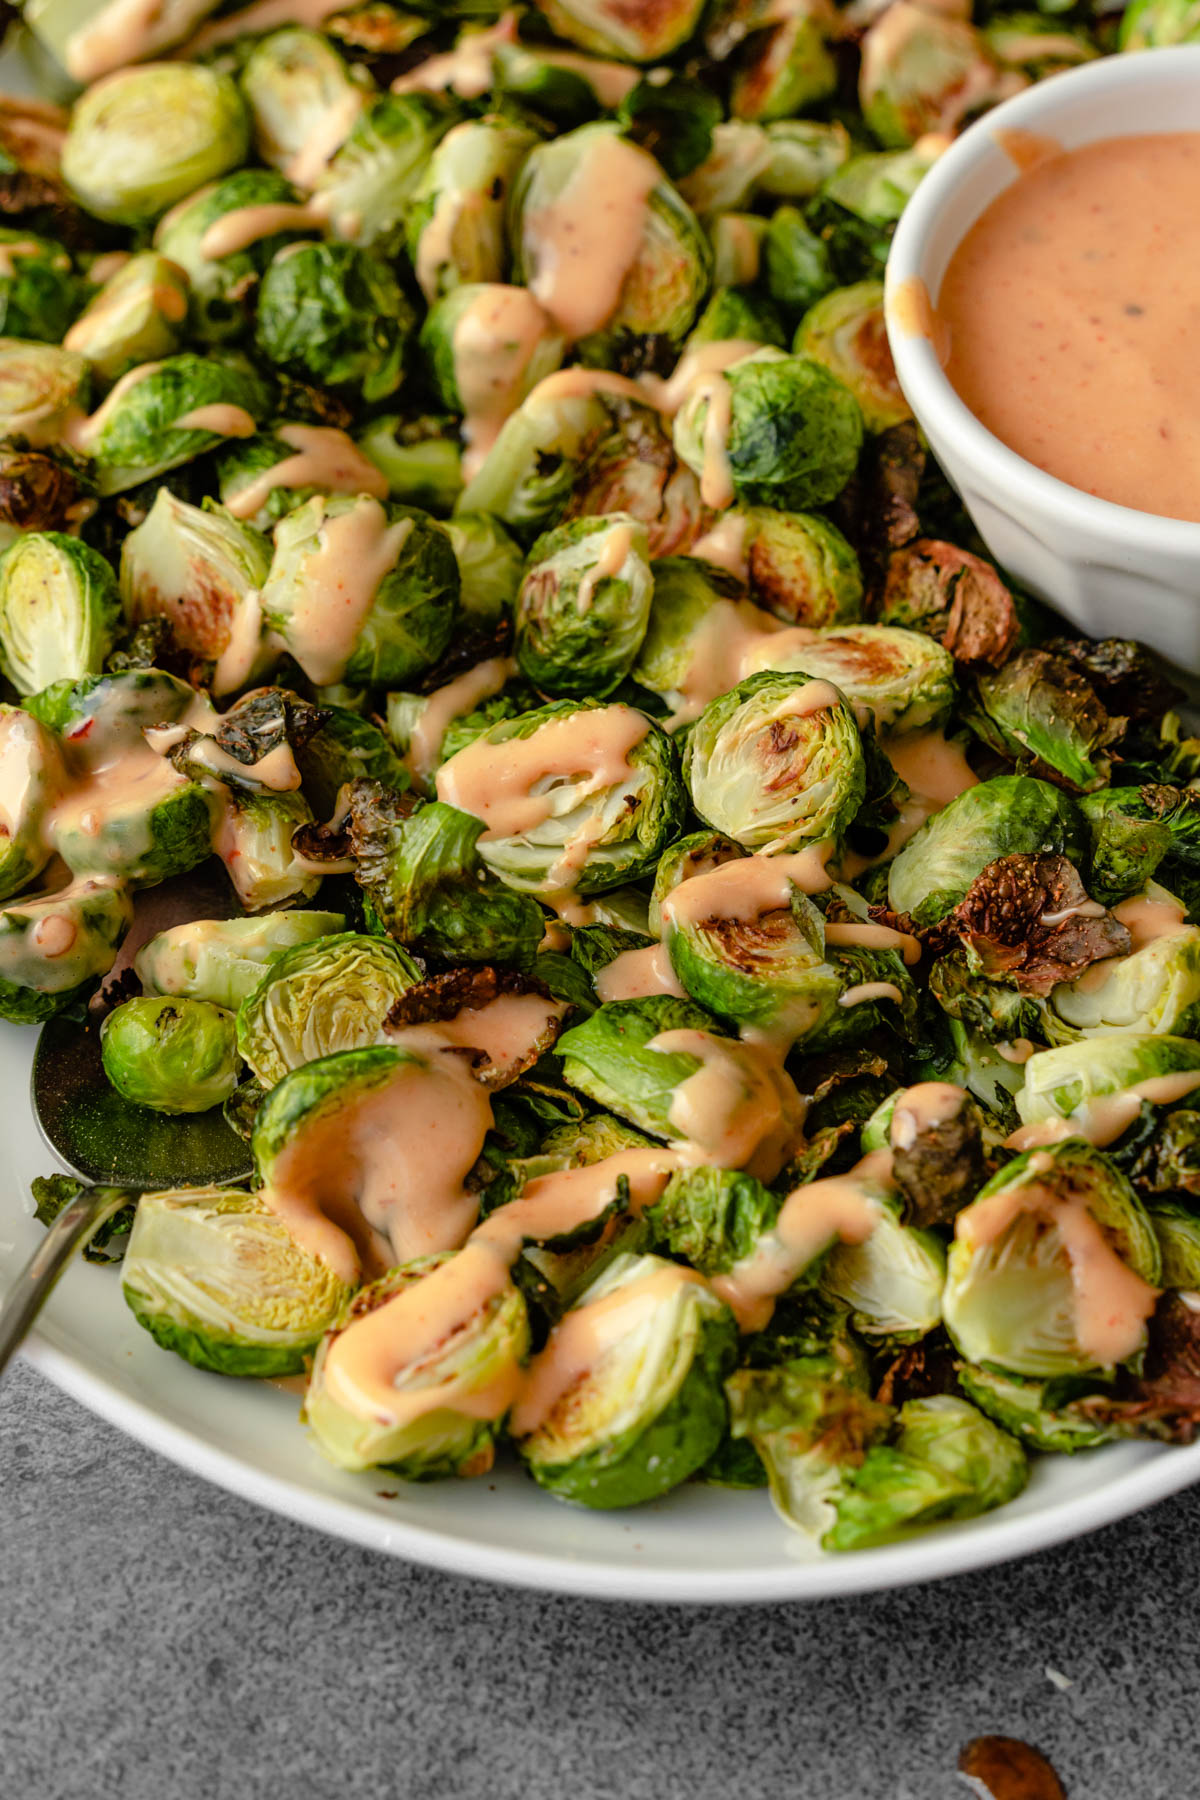 A close up of a spoon going into a platter of brussels sprouts drizzled with bang bang sauce.